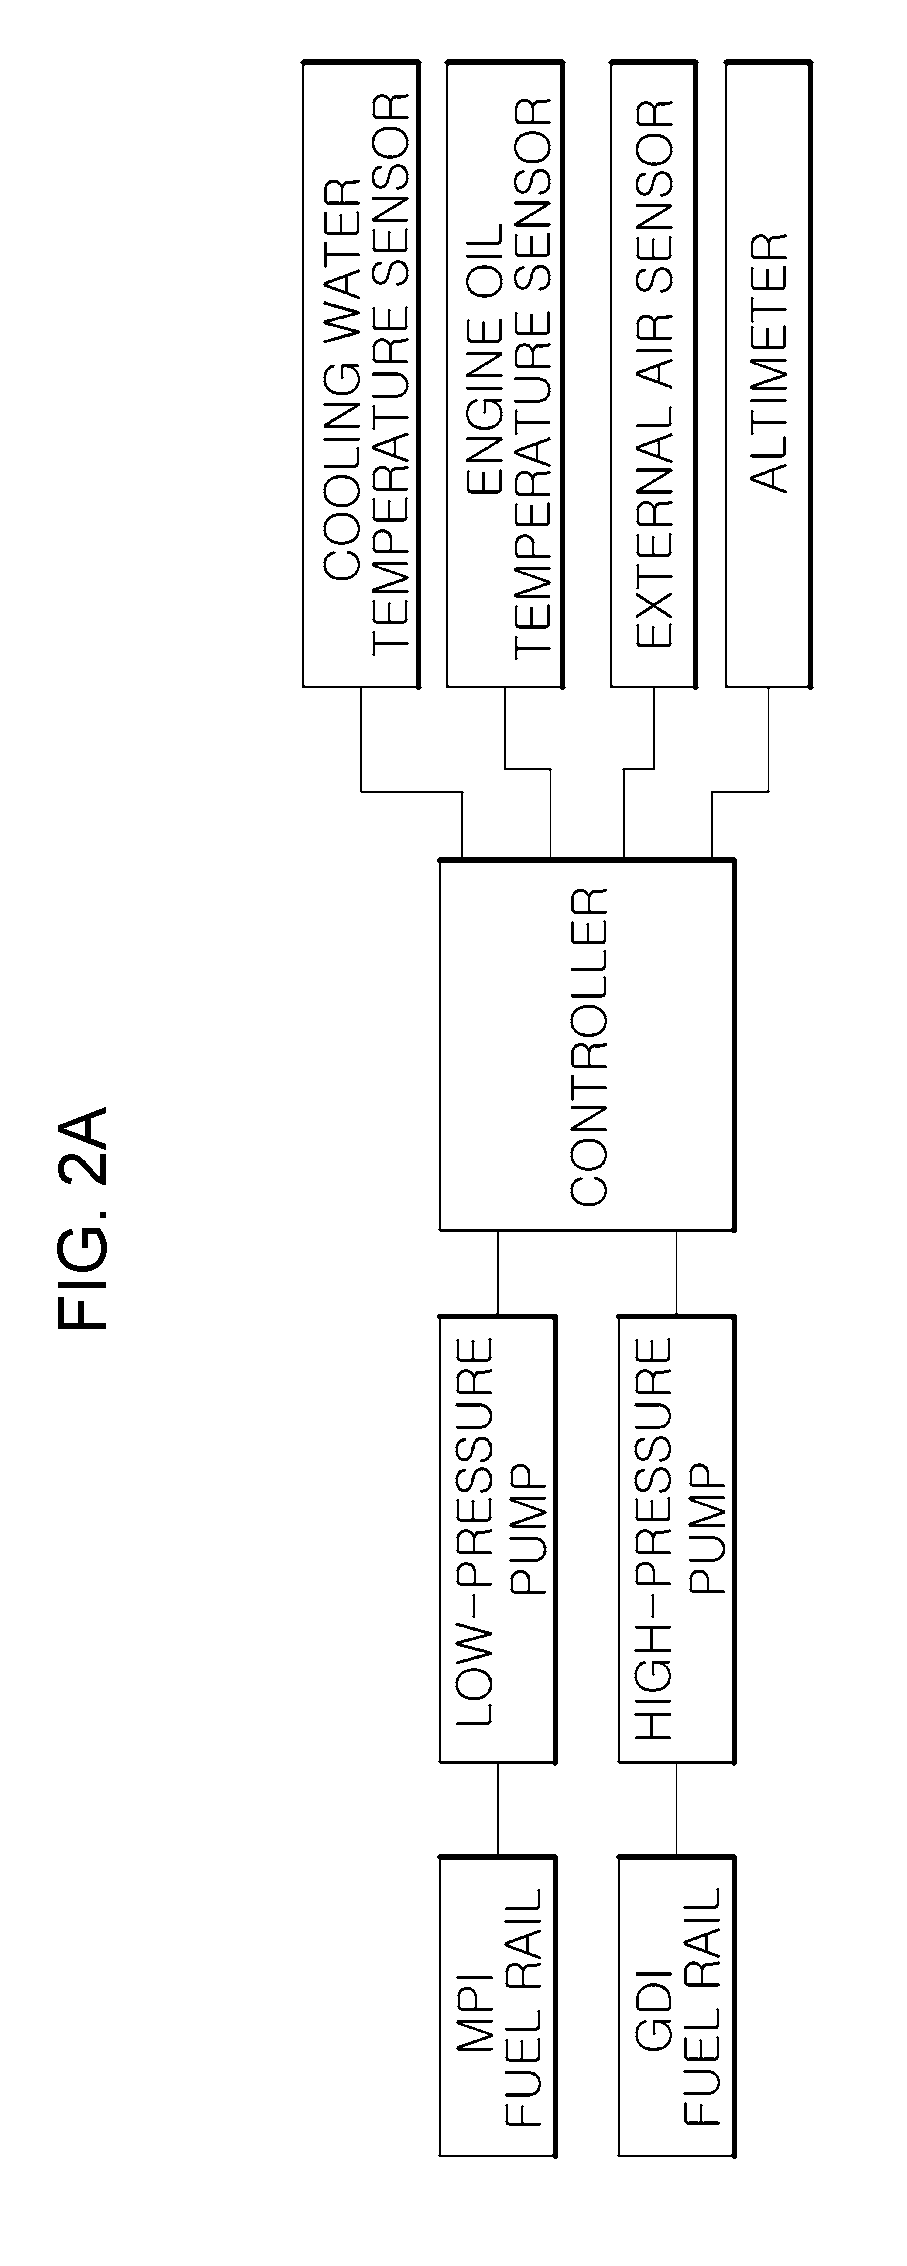 Blended fuel injection control method for vehicles